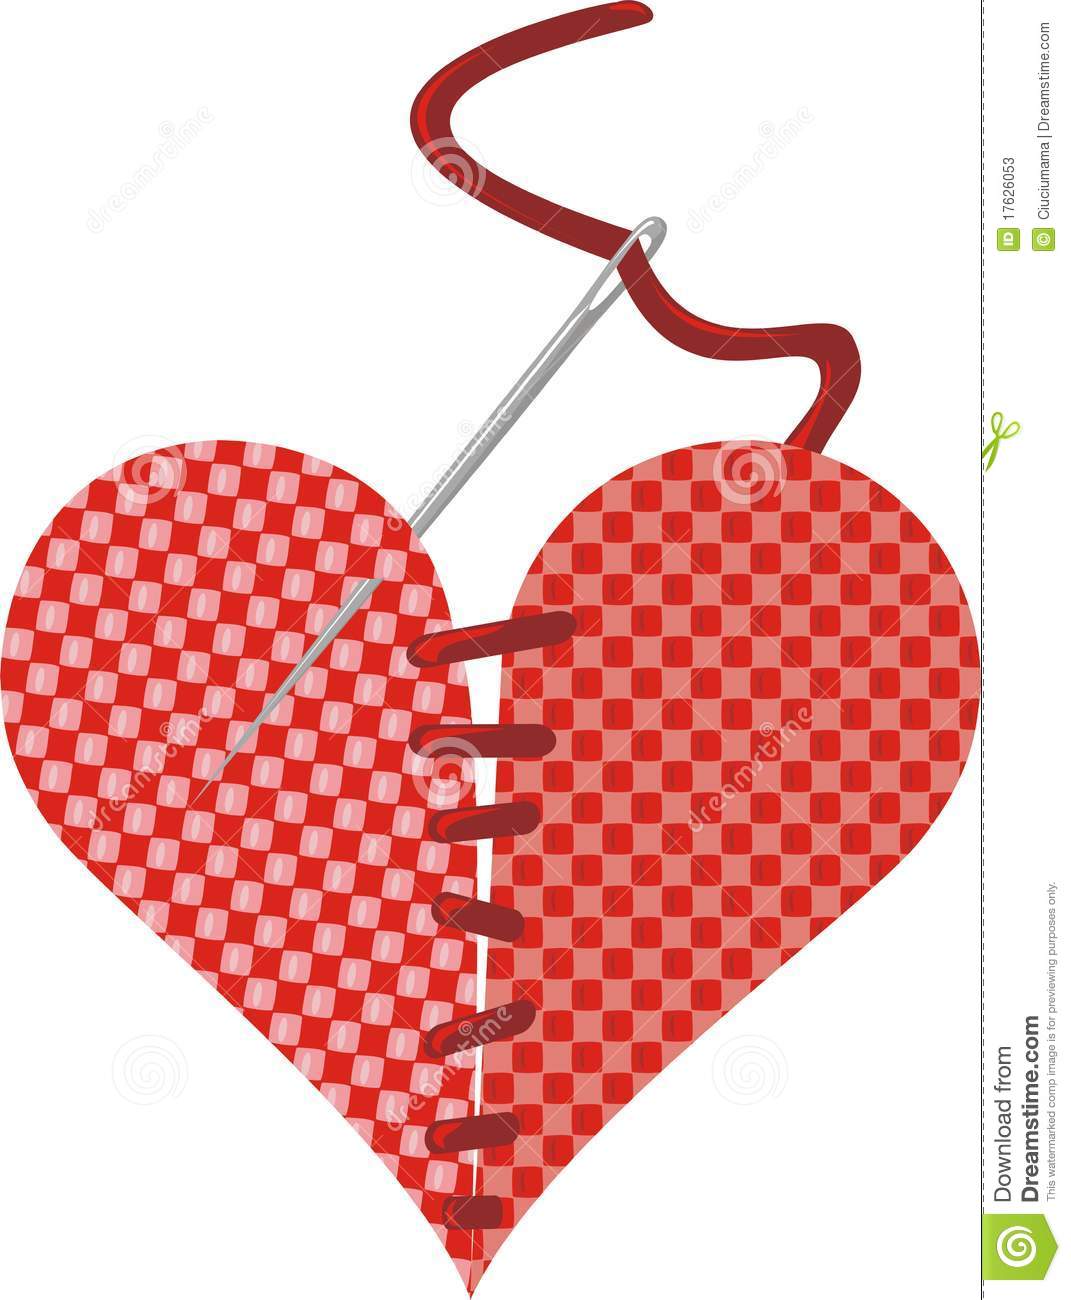 Breaking And Entering   Fabric Heart Stock Photos   Image  17626053